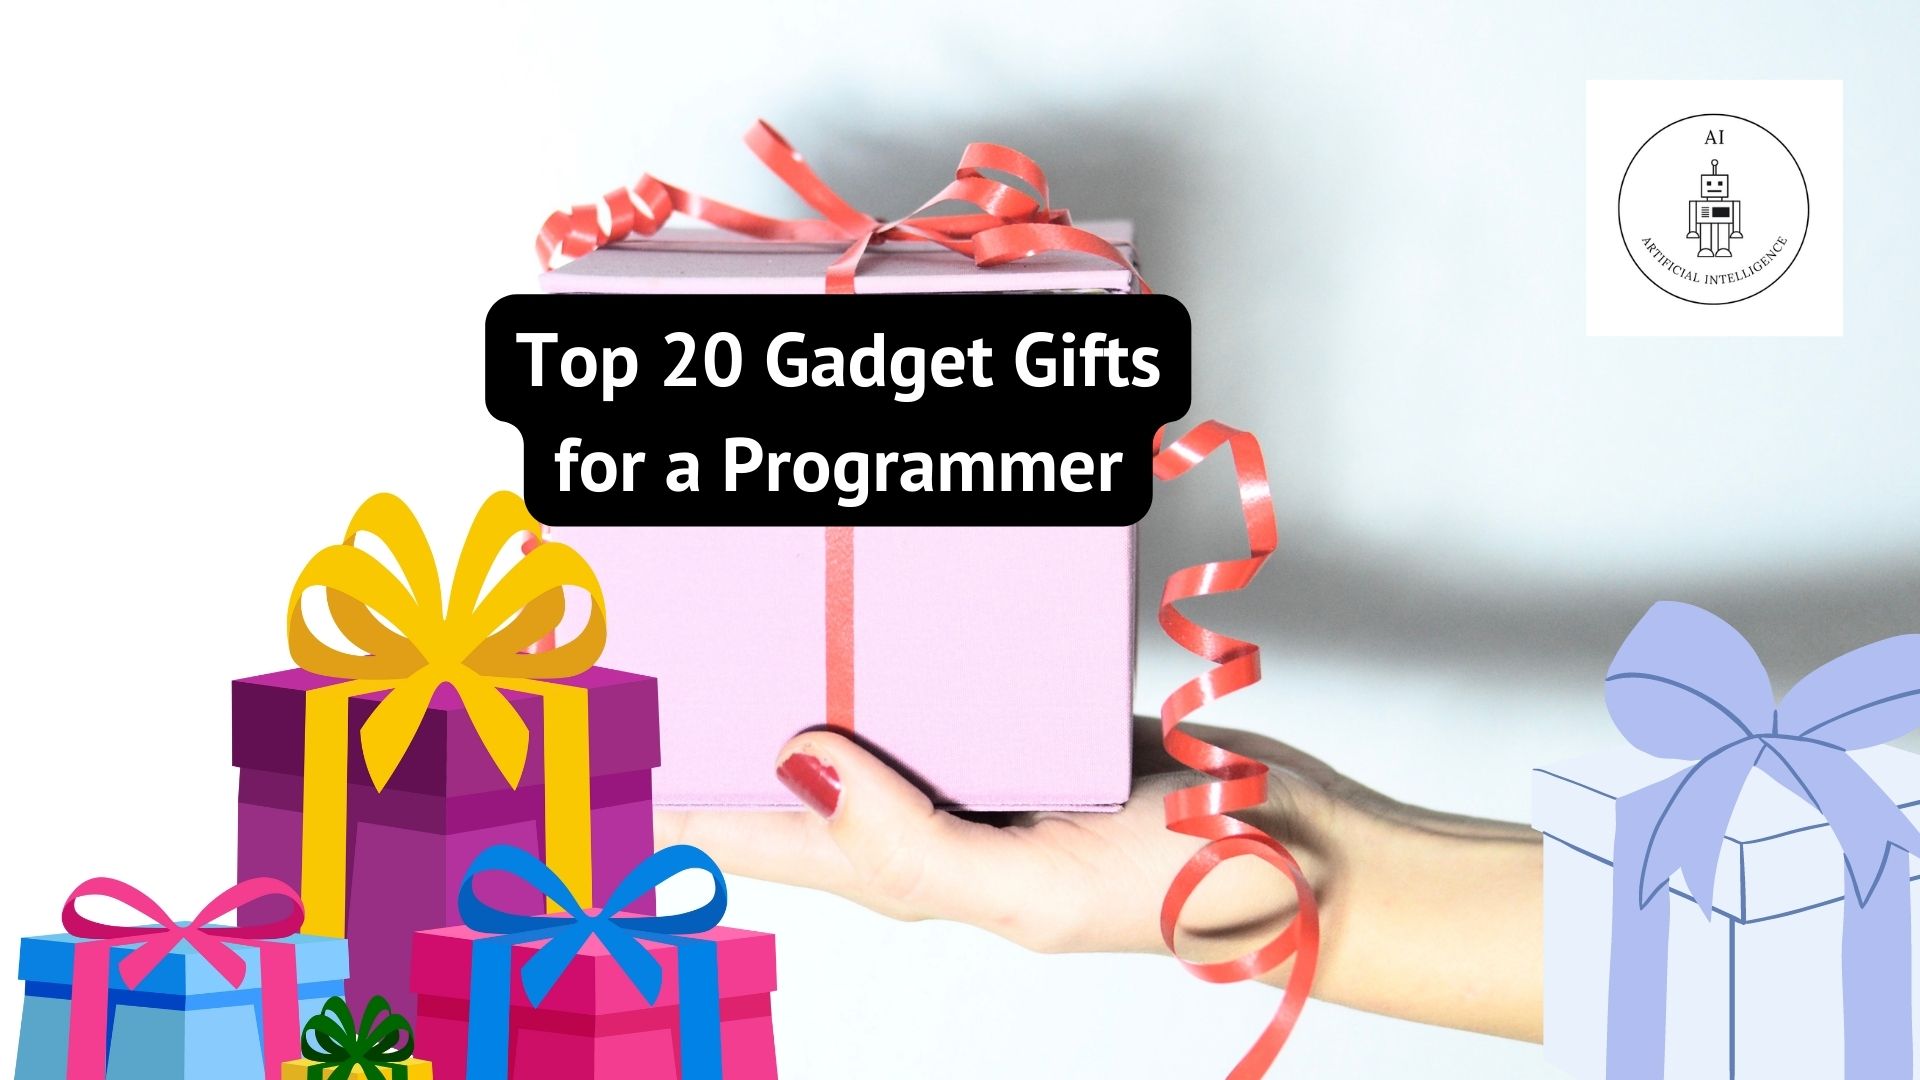 Top 20 Gadget Gifts for a Programmer